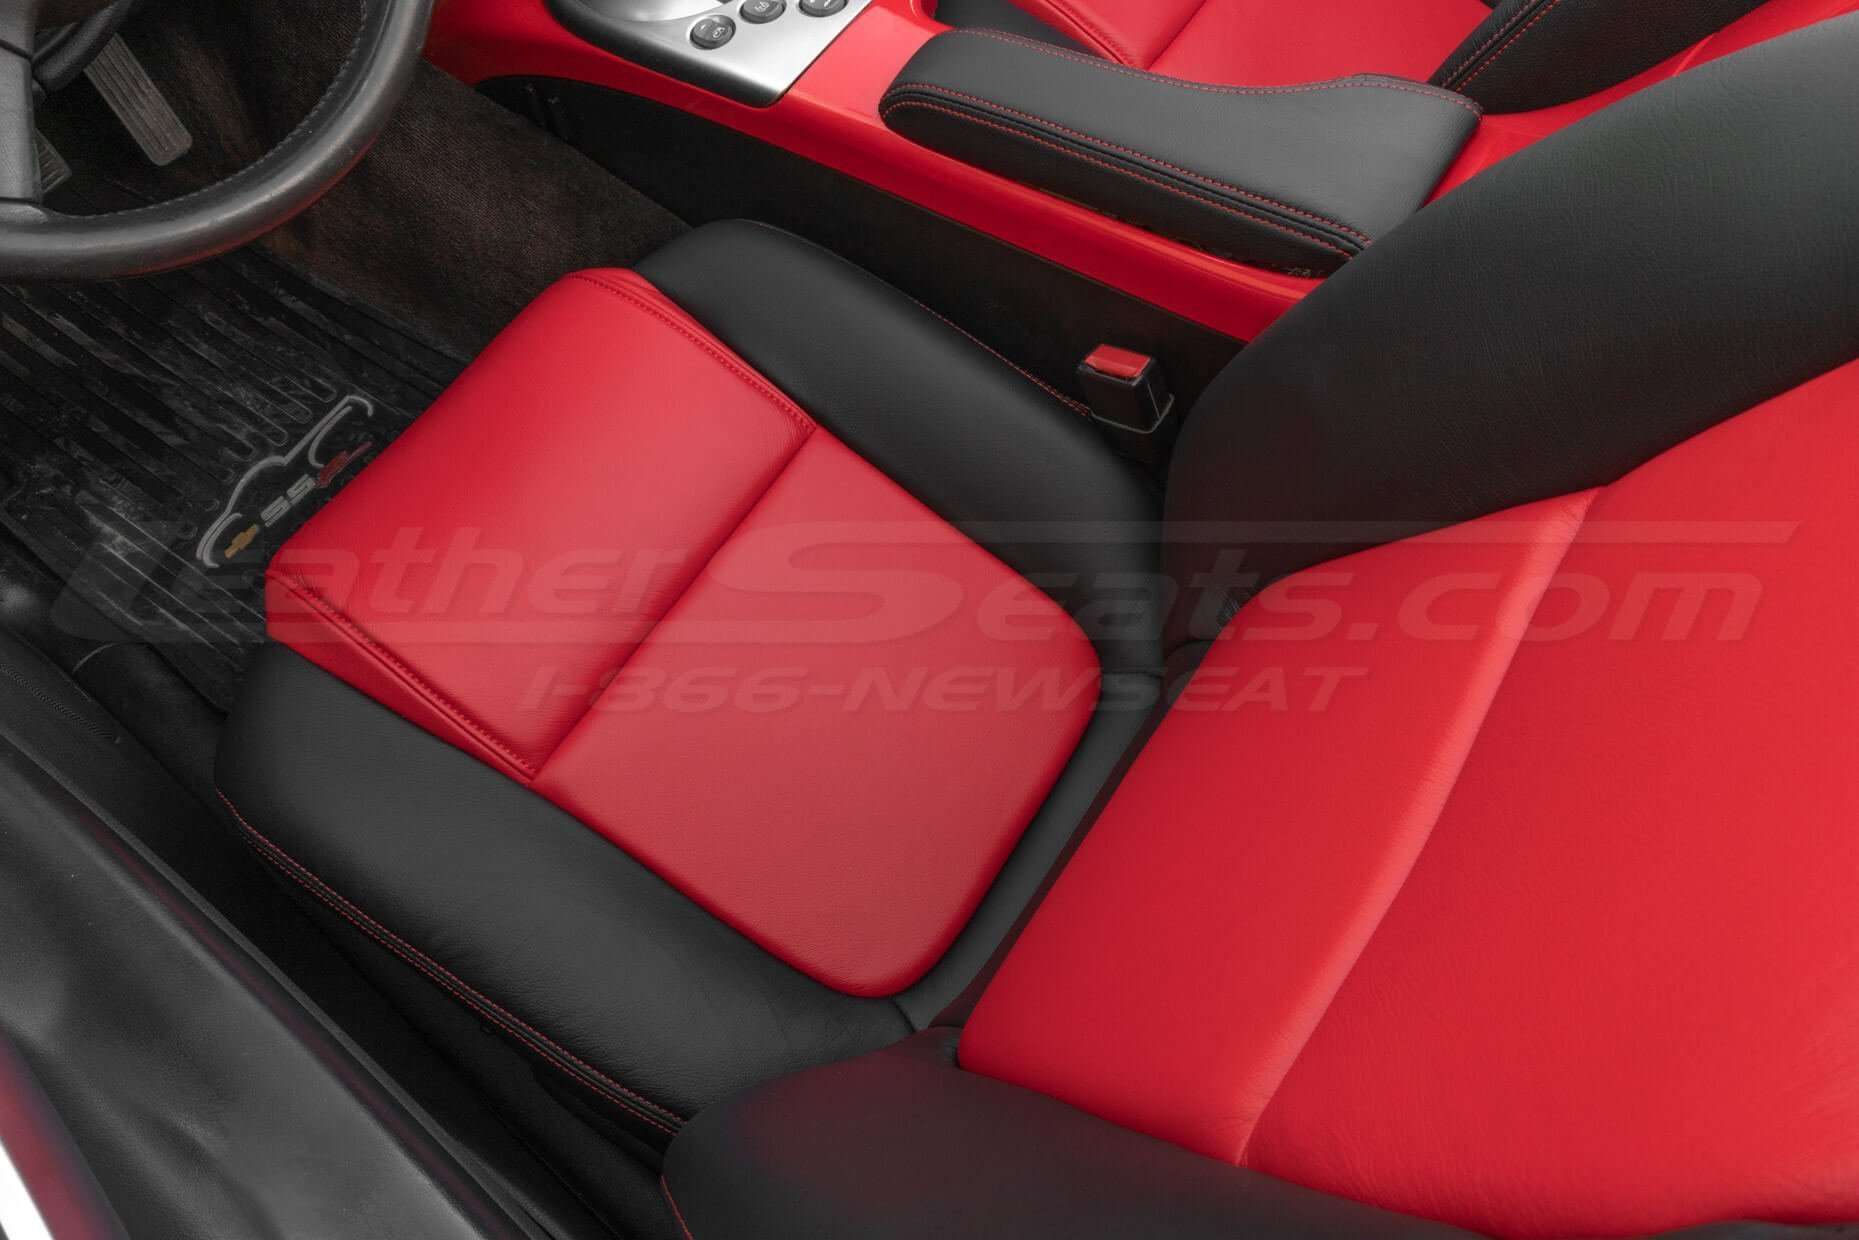 Top-down view of installed Chevy SSR Leather seats in Black and Bright Red